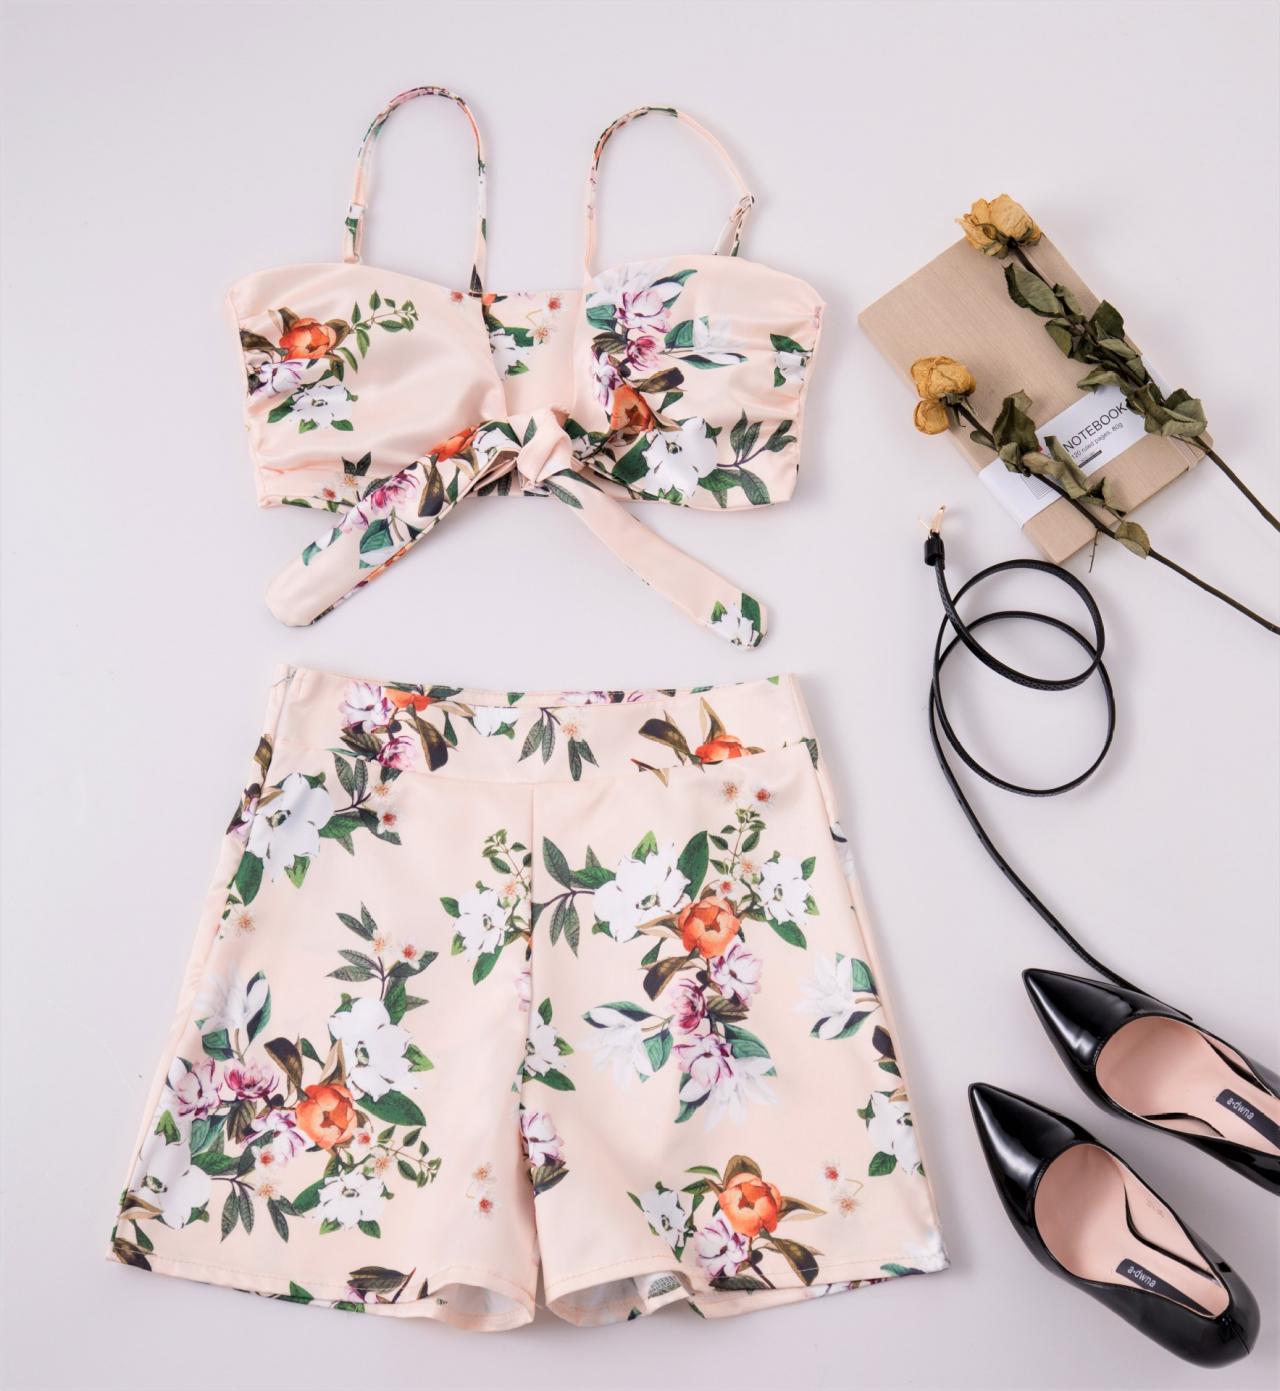 Floral Print Two-piece Set Featuring Spaghetti Strap Cropped Top With Tie Back And Shorts